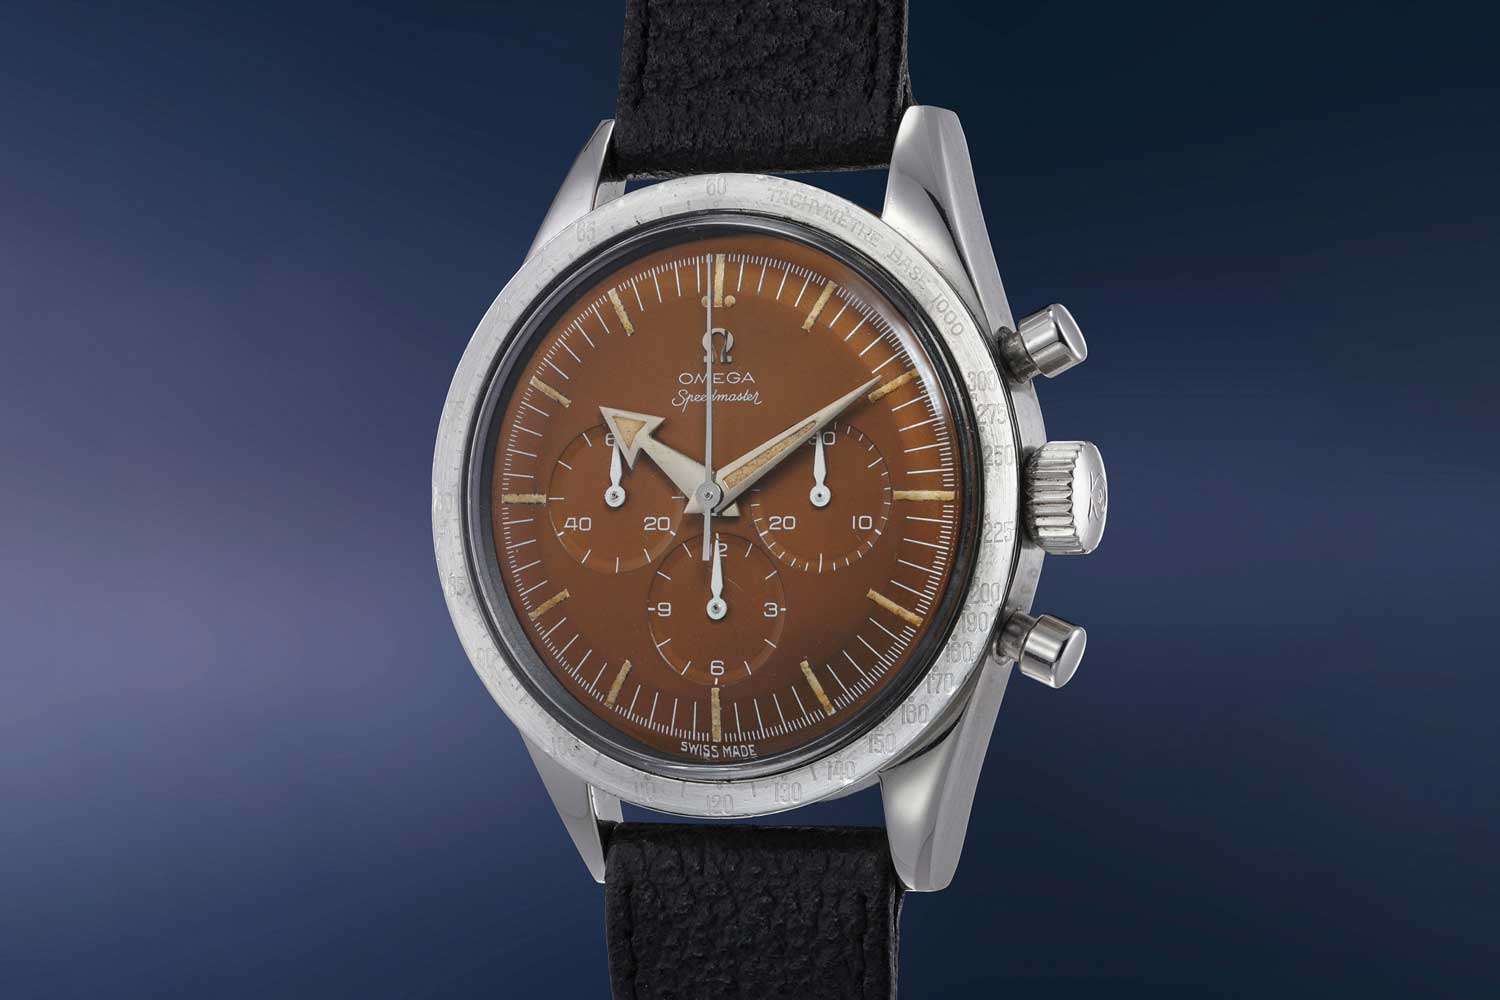 The tropical chocolate dial ref. 2915-1 that sold with Phillips Watches at their November 2021 Geneva sale for an earth-shattering CHF 3,115,500